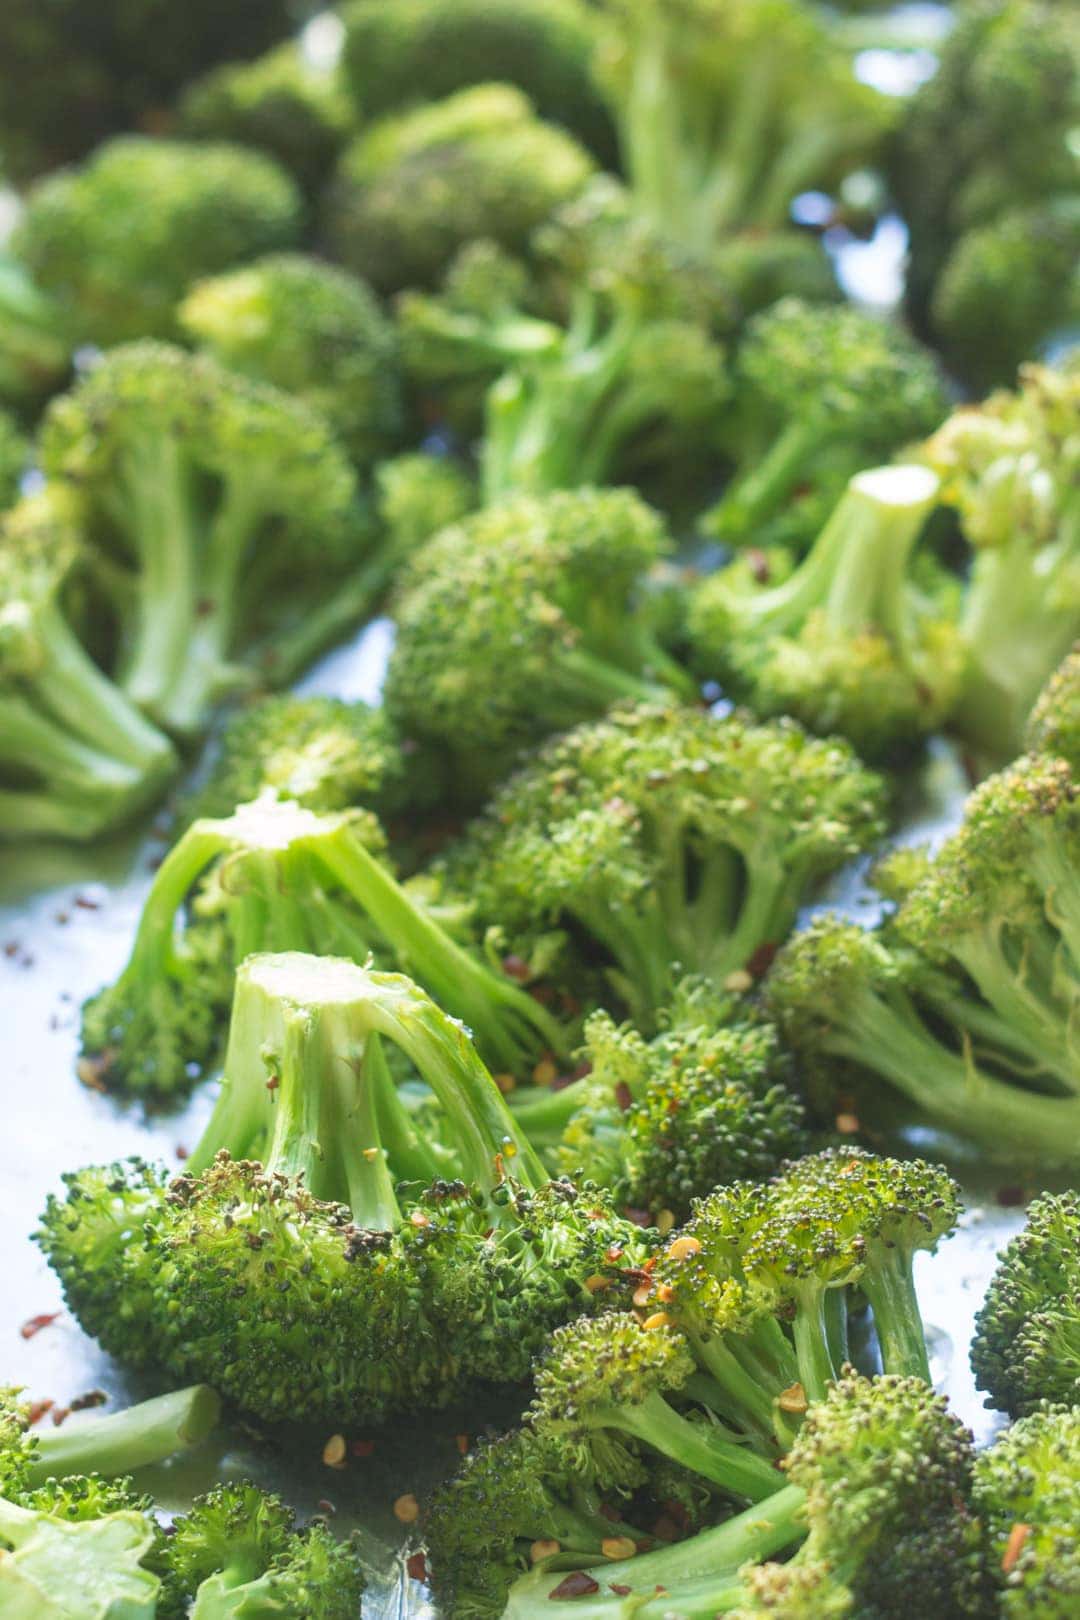 Roasted broccoli sprinkled with red pepper flakes on a sheet pan lined with aluminum foil.